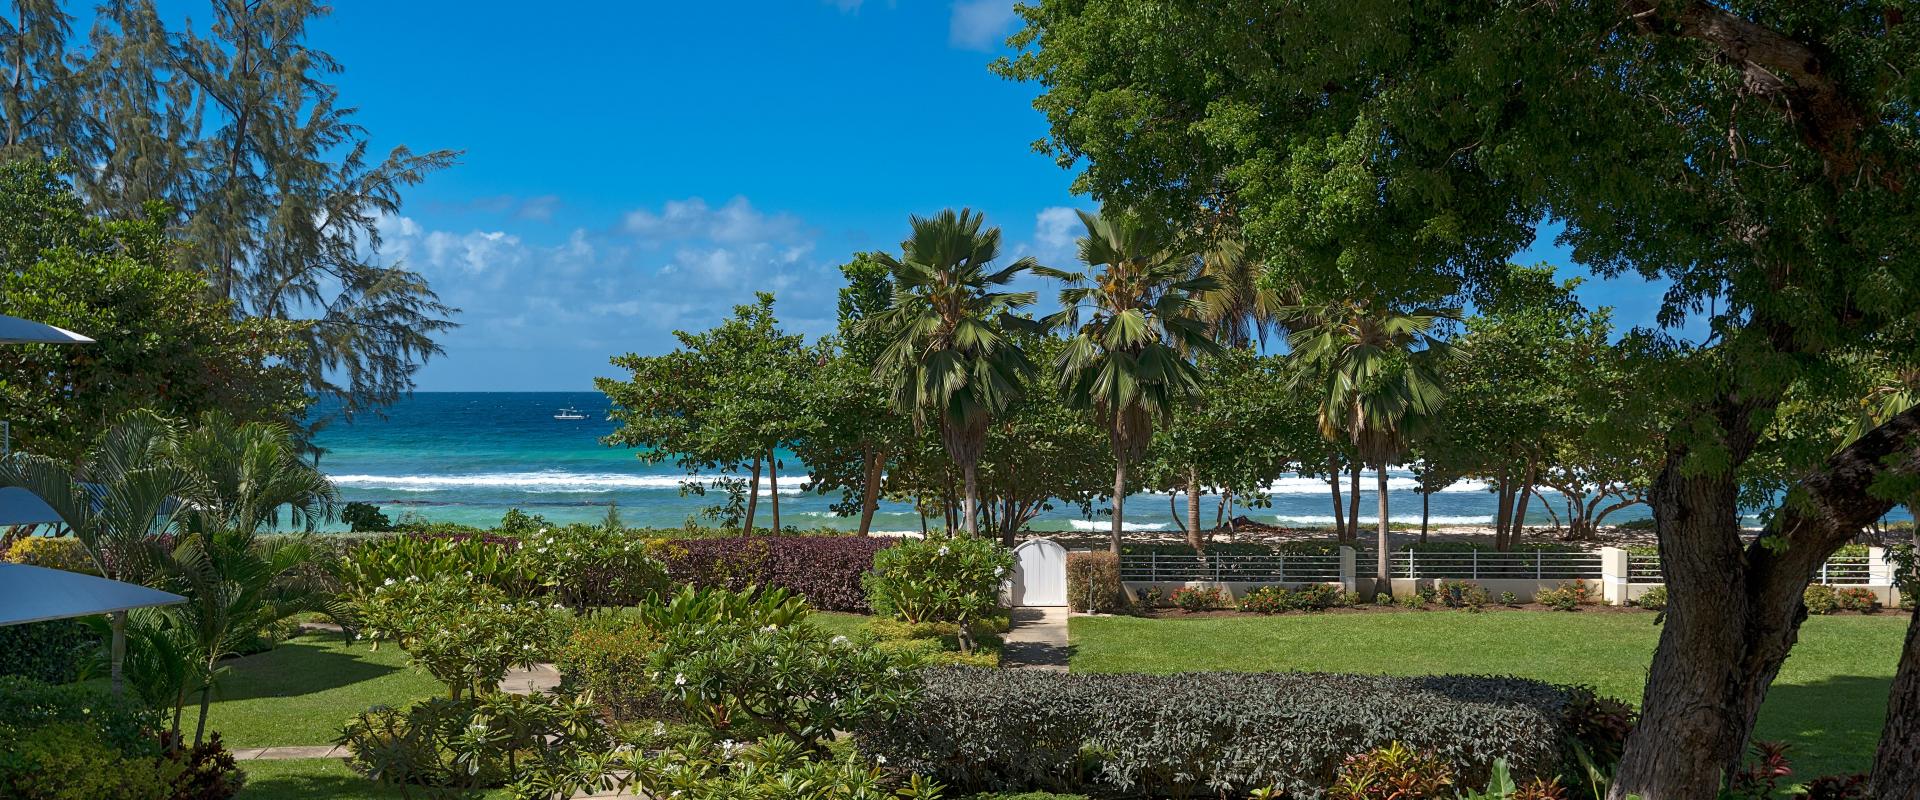 Palm Beach 502 Holiday Rental Barbados Gardens and Ocean View